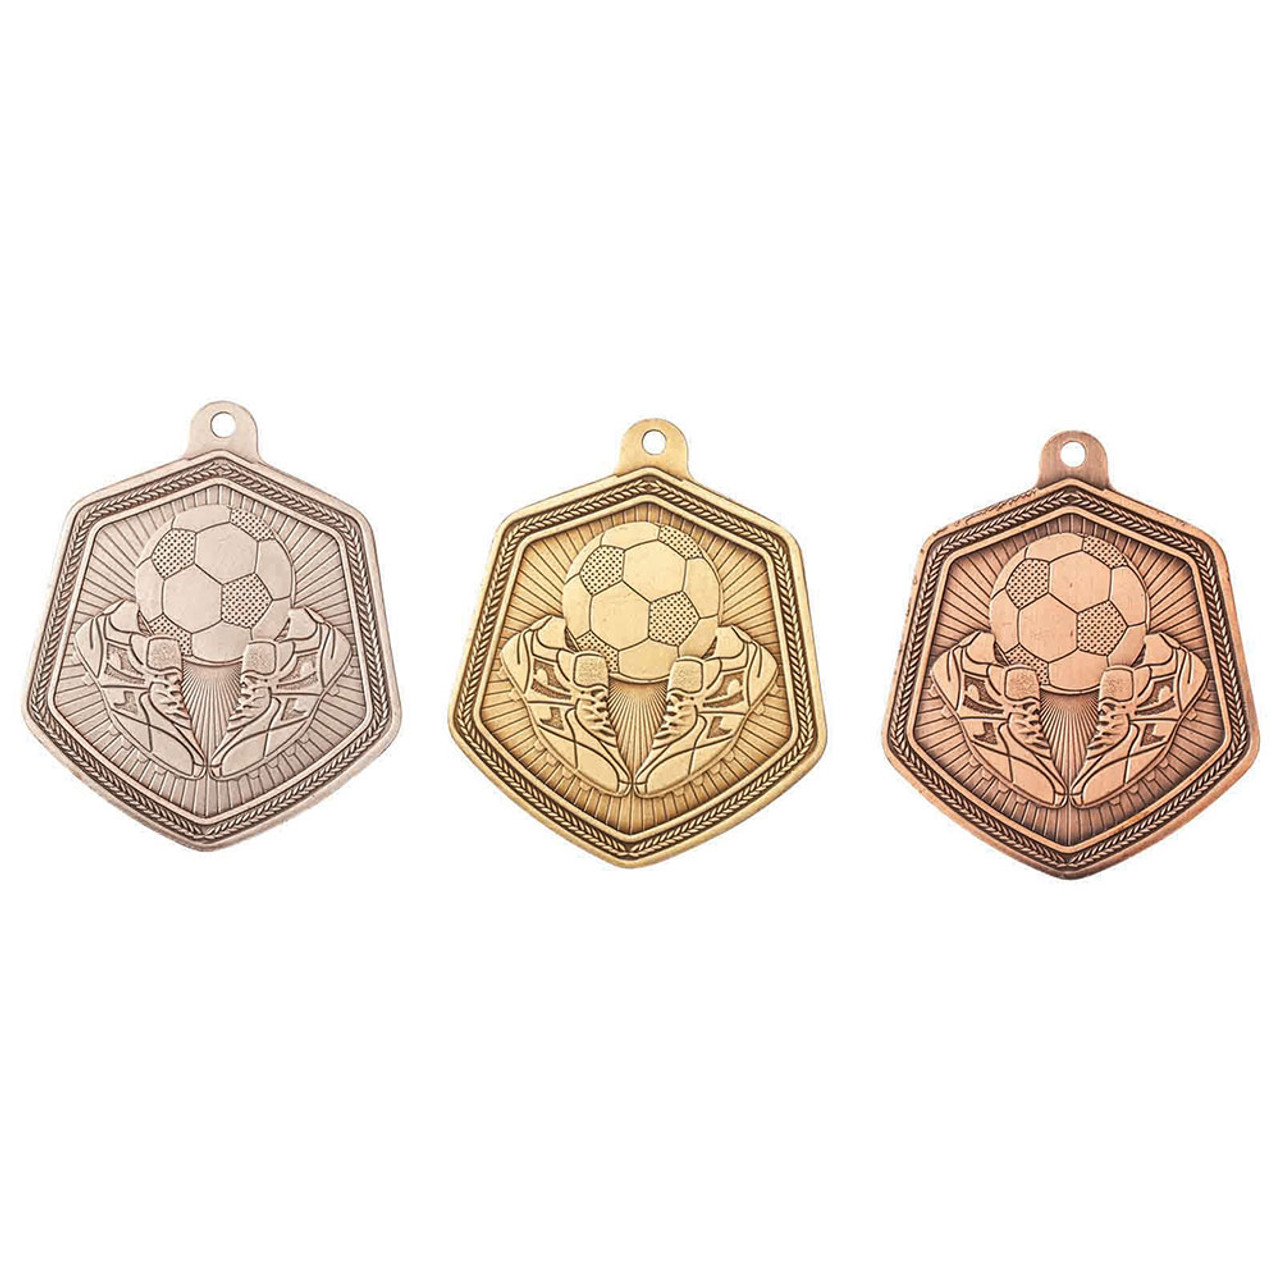 Football Medal Falcon Stamped Iron 65mm in 3 Colours